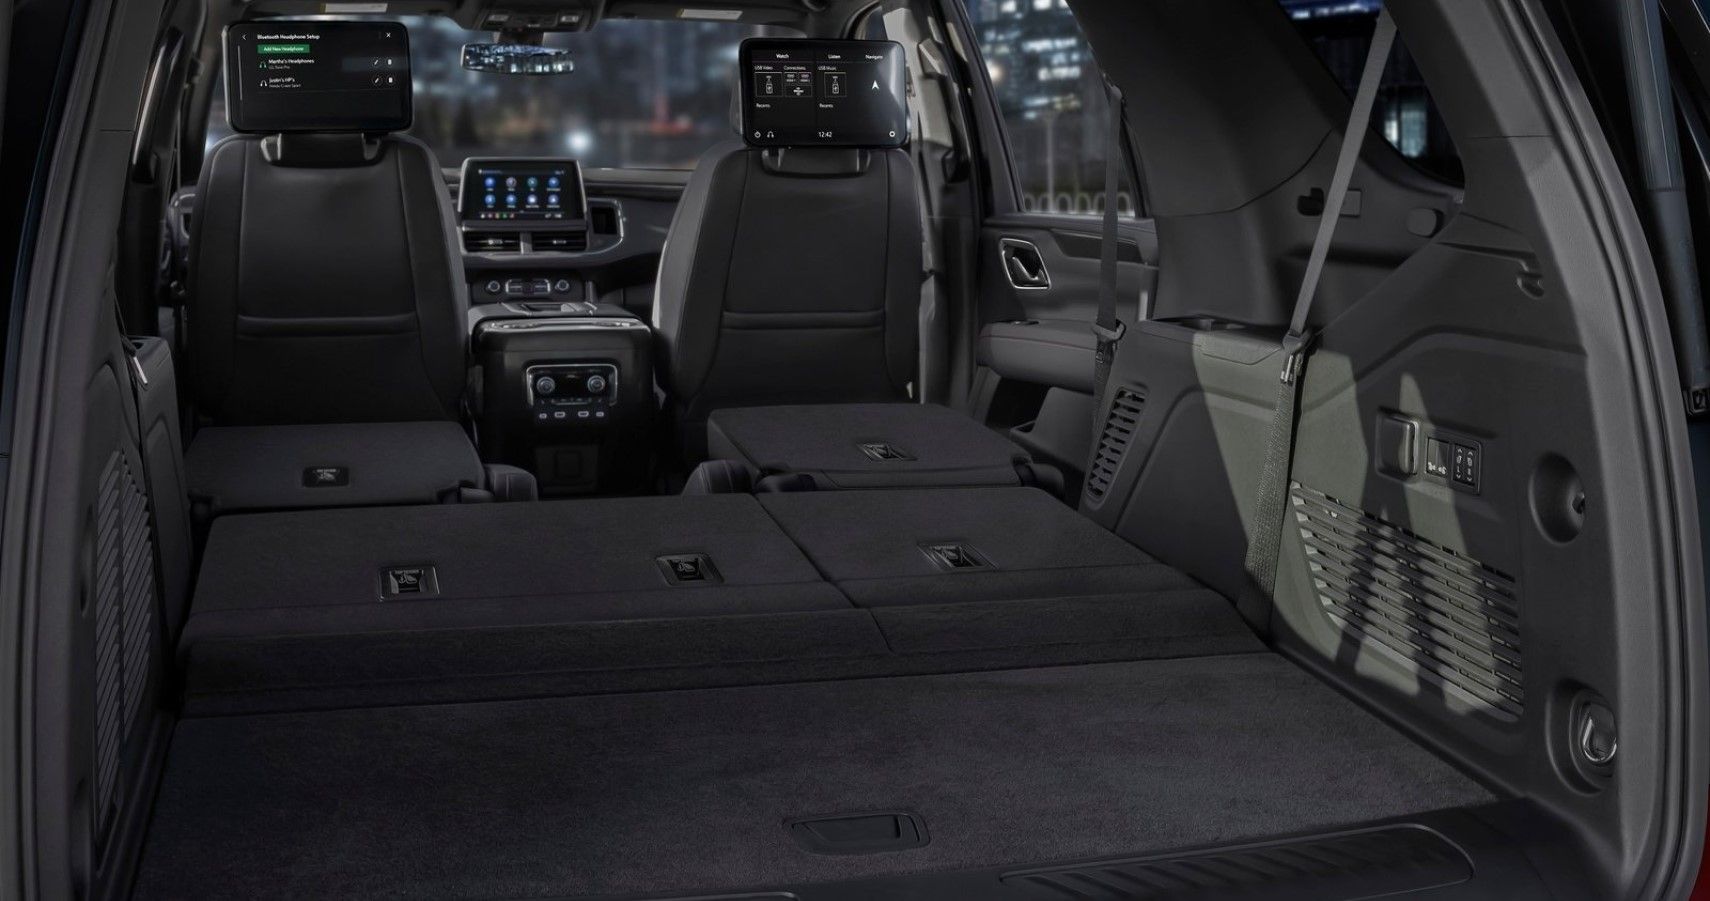 Chevrolet Tahoe cargo space layout view